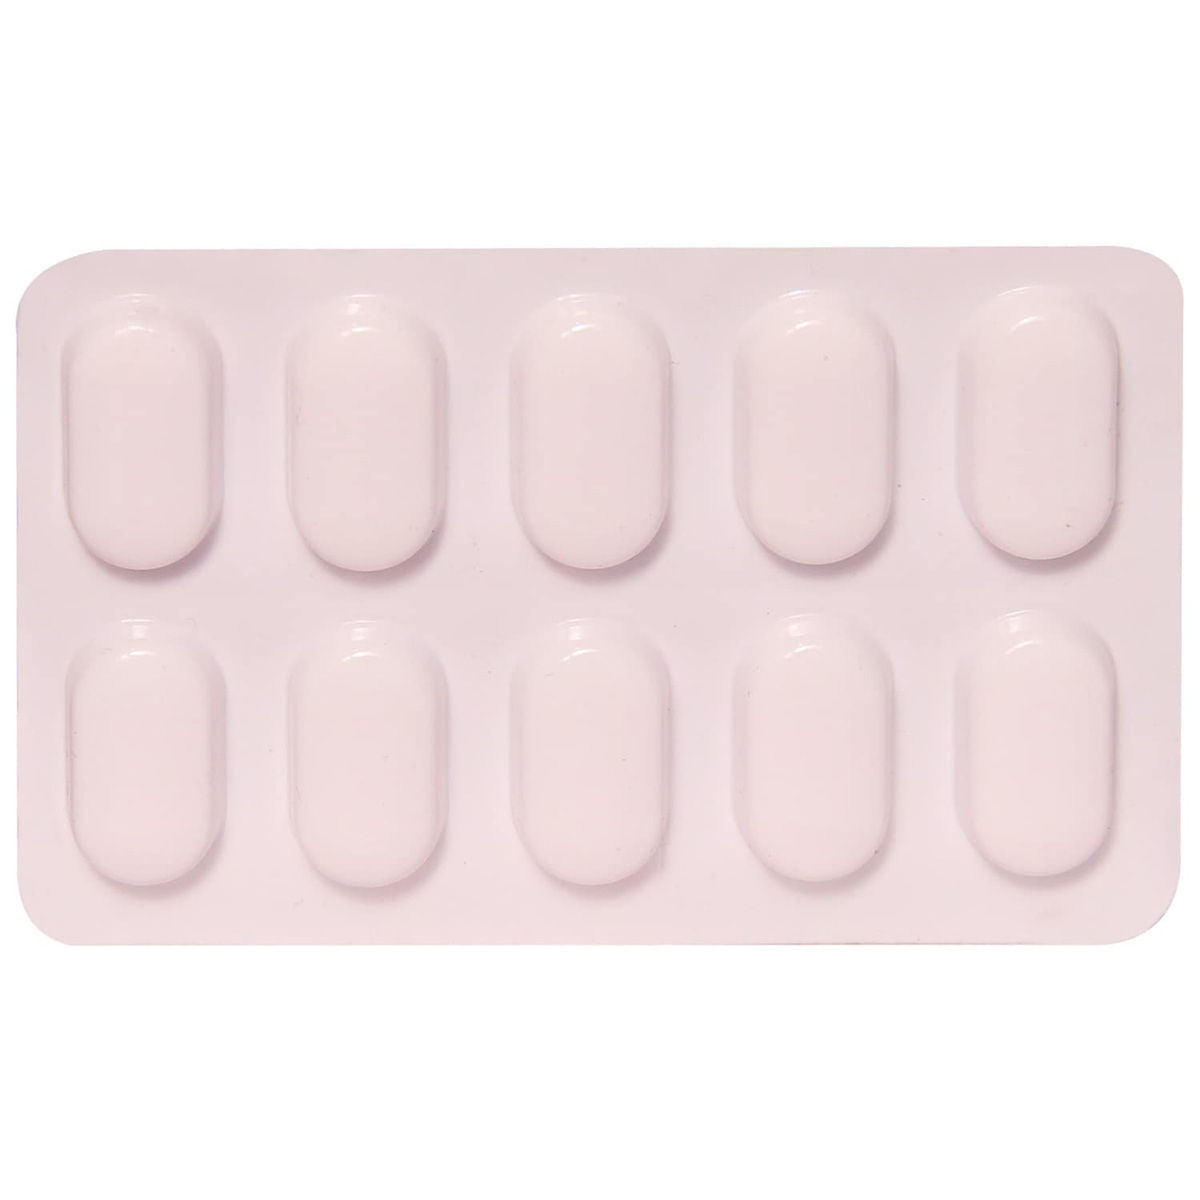 Bigomet 500 Tablet 10's Price, Uses, Side Effects, Composition - Apollo ...